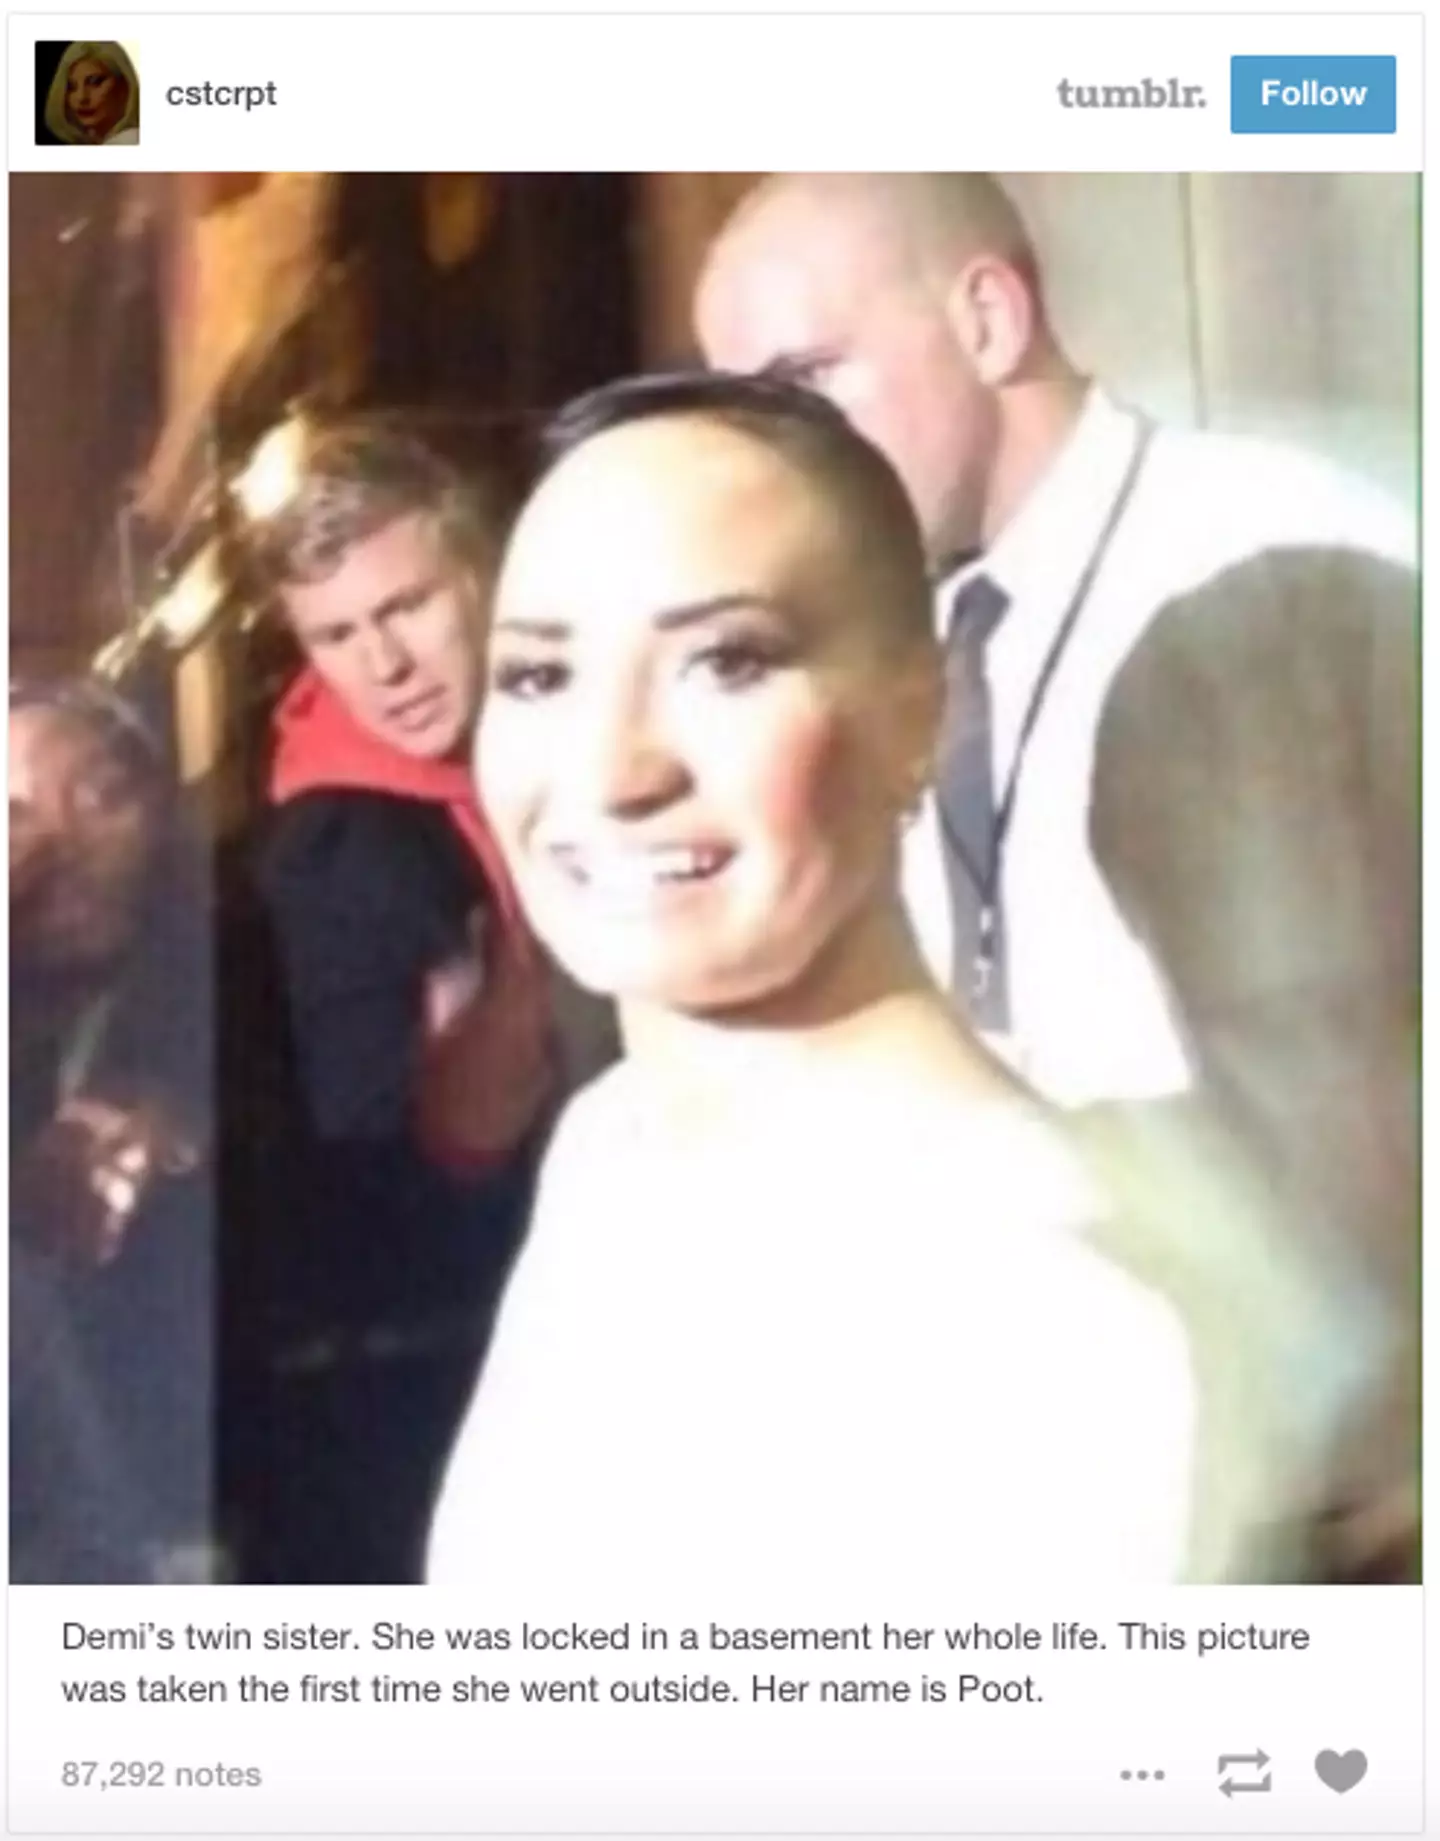 Demi Lovato thought the photo was just a 'bad angle'.